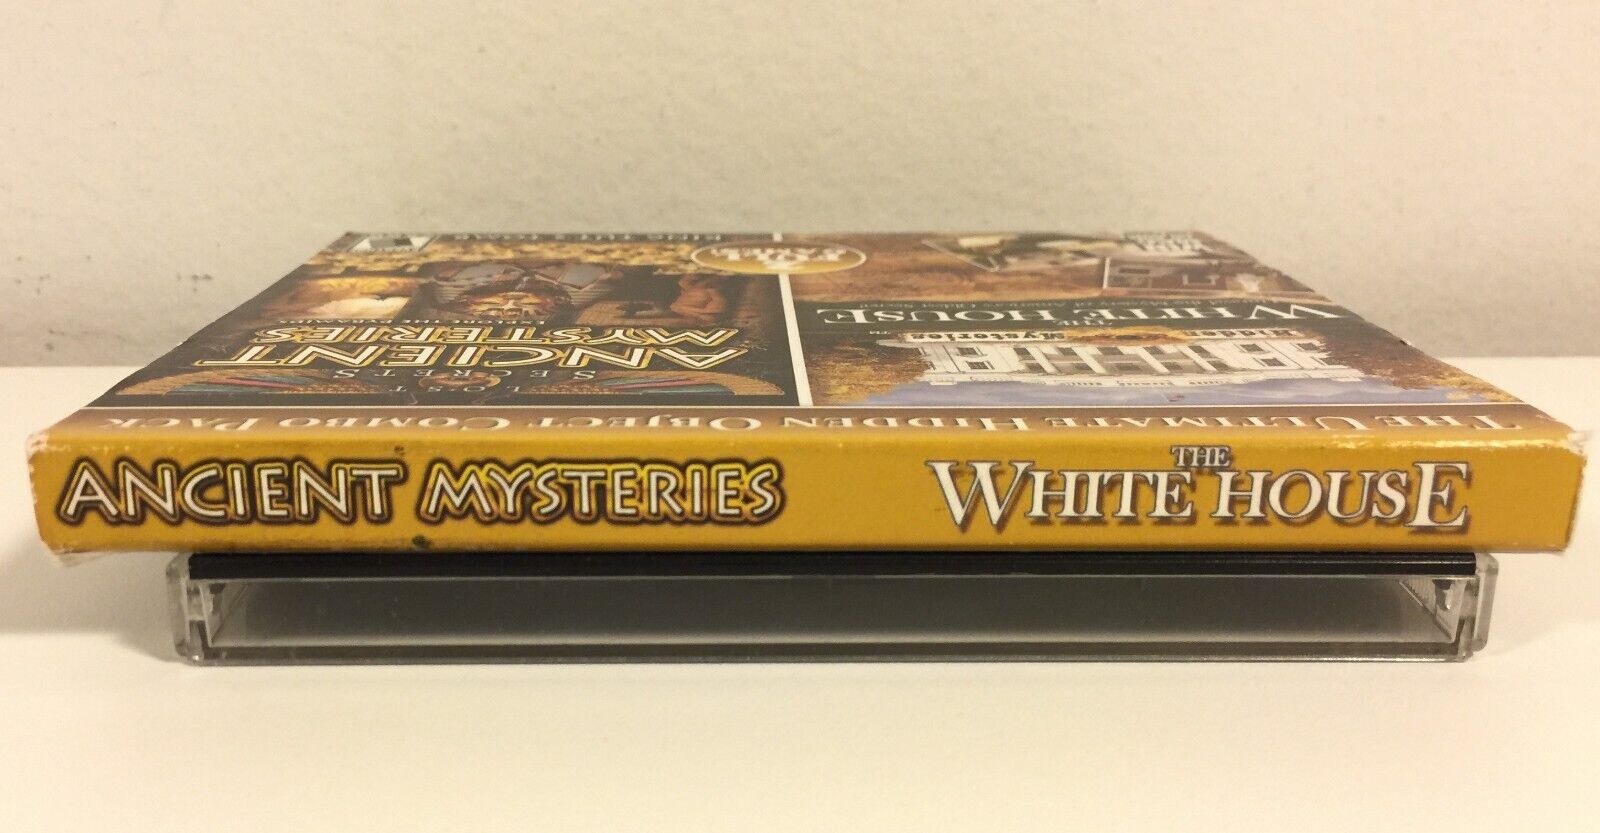 Hidden Mysteries: The White House - Lost Secrets: Ancient Mysteries - 2 PC Games